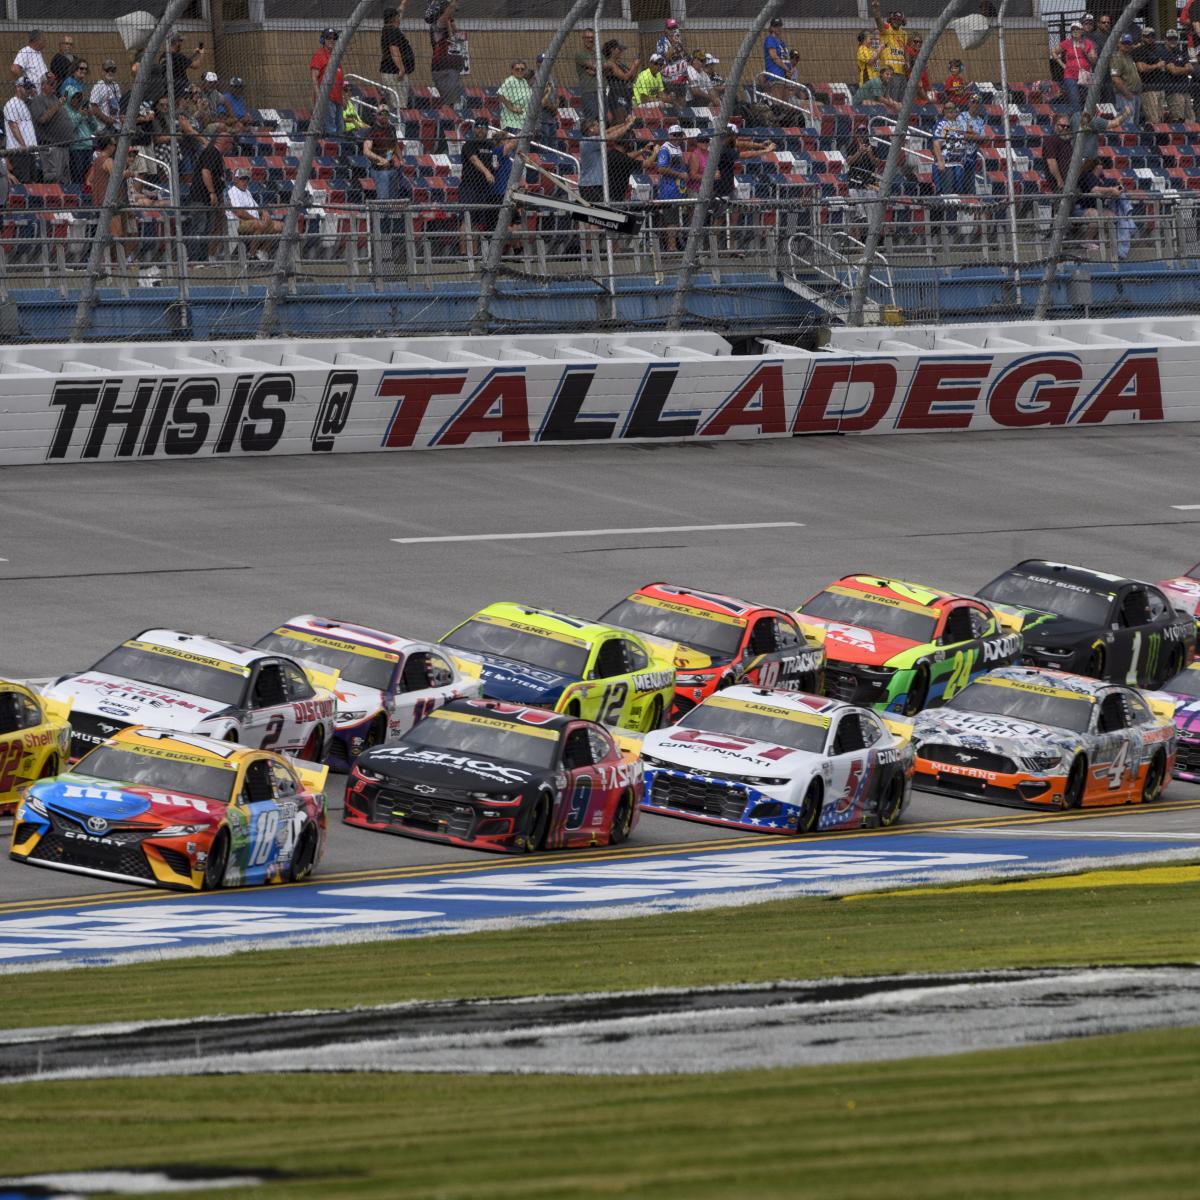 NASCAR at Talladega 2022: Odds, Preview and Top Storylines